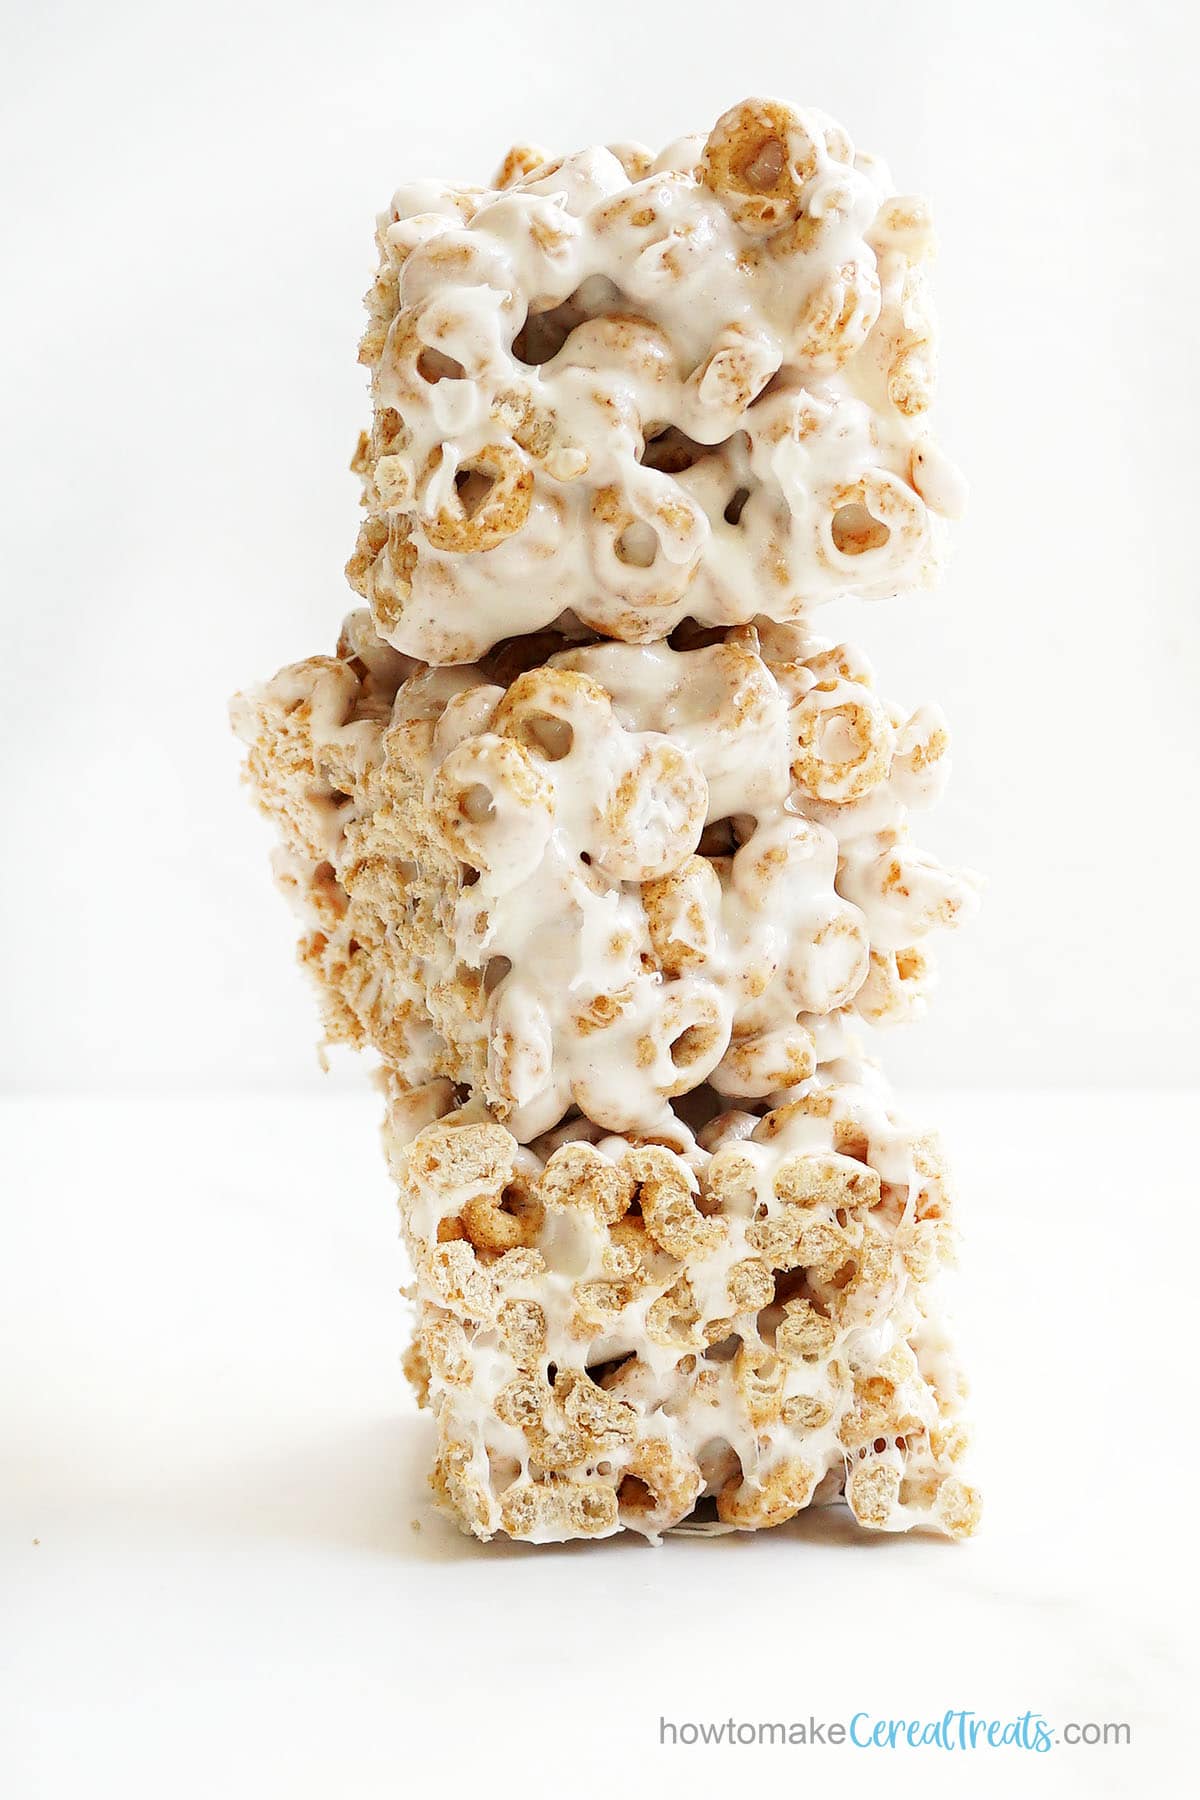 Cereal treats with Pumpkin Spice cheerios for fall and Thanksgiving